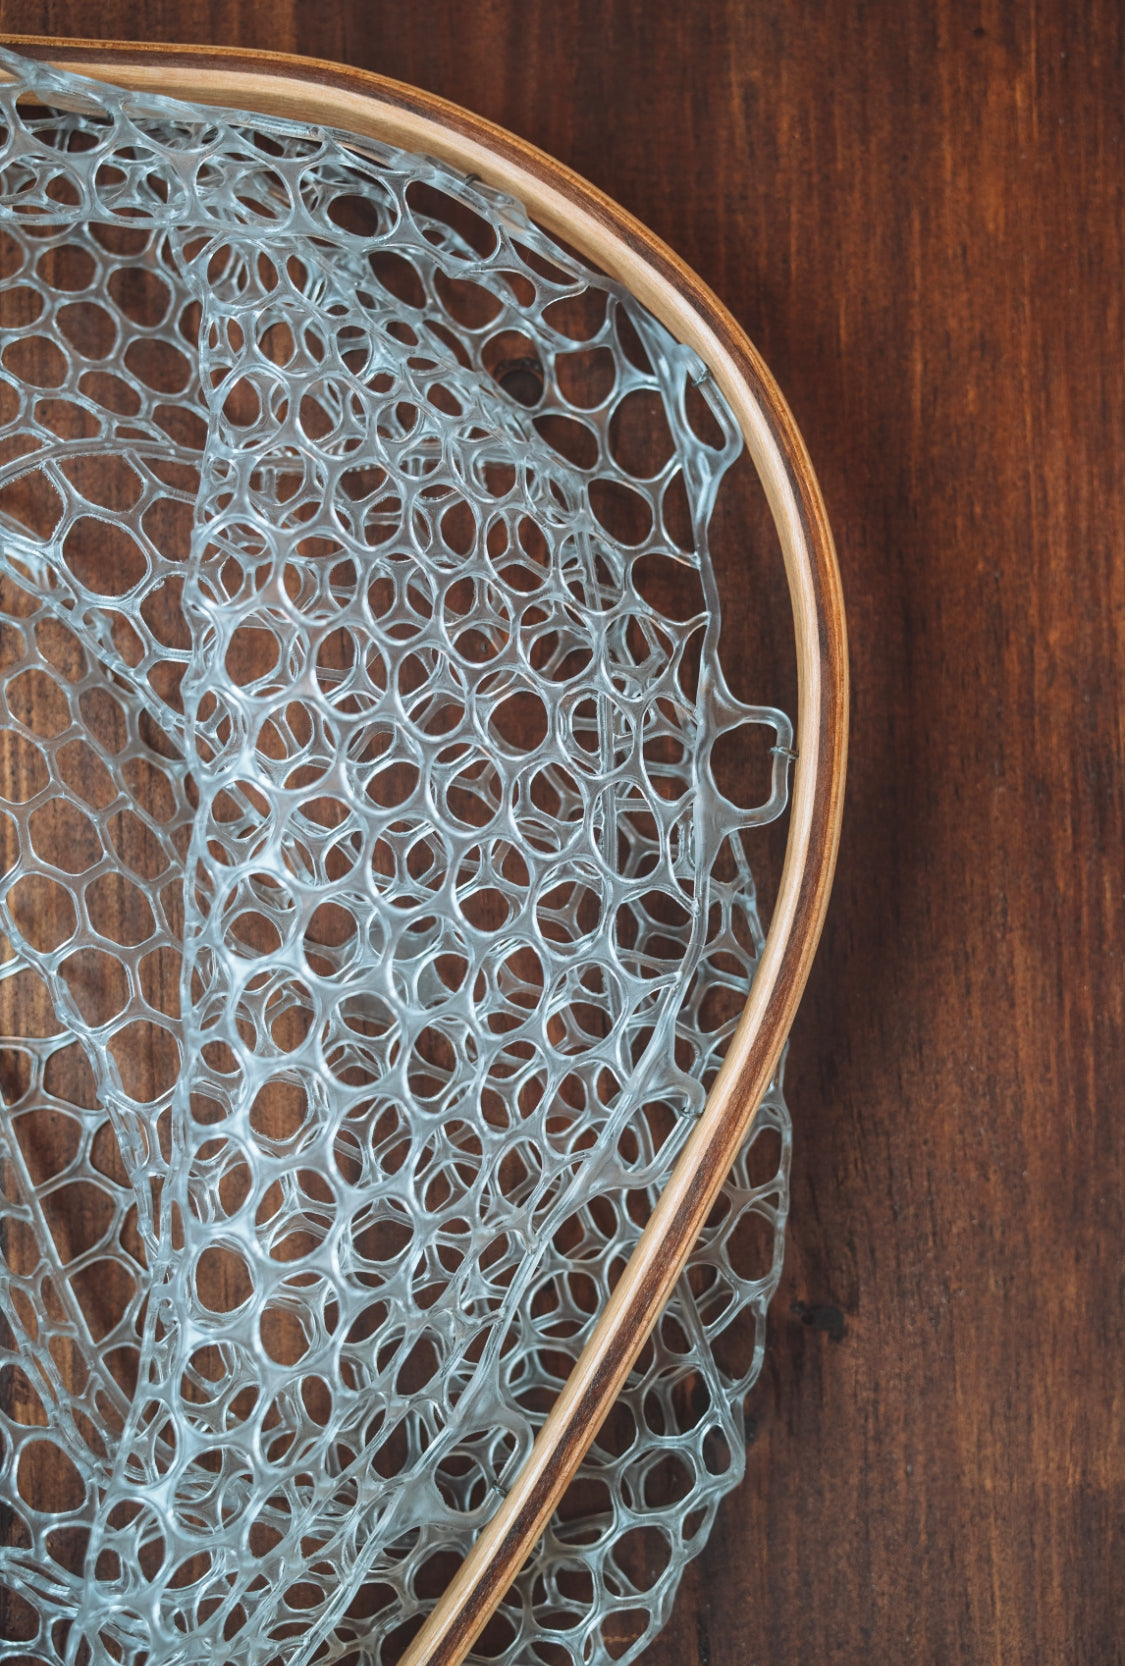 Classic Wooden Fishing Nets for trout fishing hand made from walnut,  cherry, hickory — Wayward Handcrafted Fly Fishing Gear - made in  Philadelphia USAWood Fly Fishing net - Handcrafted Custom Fly Fishing